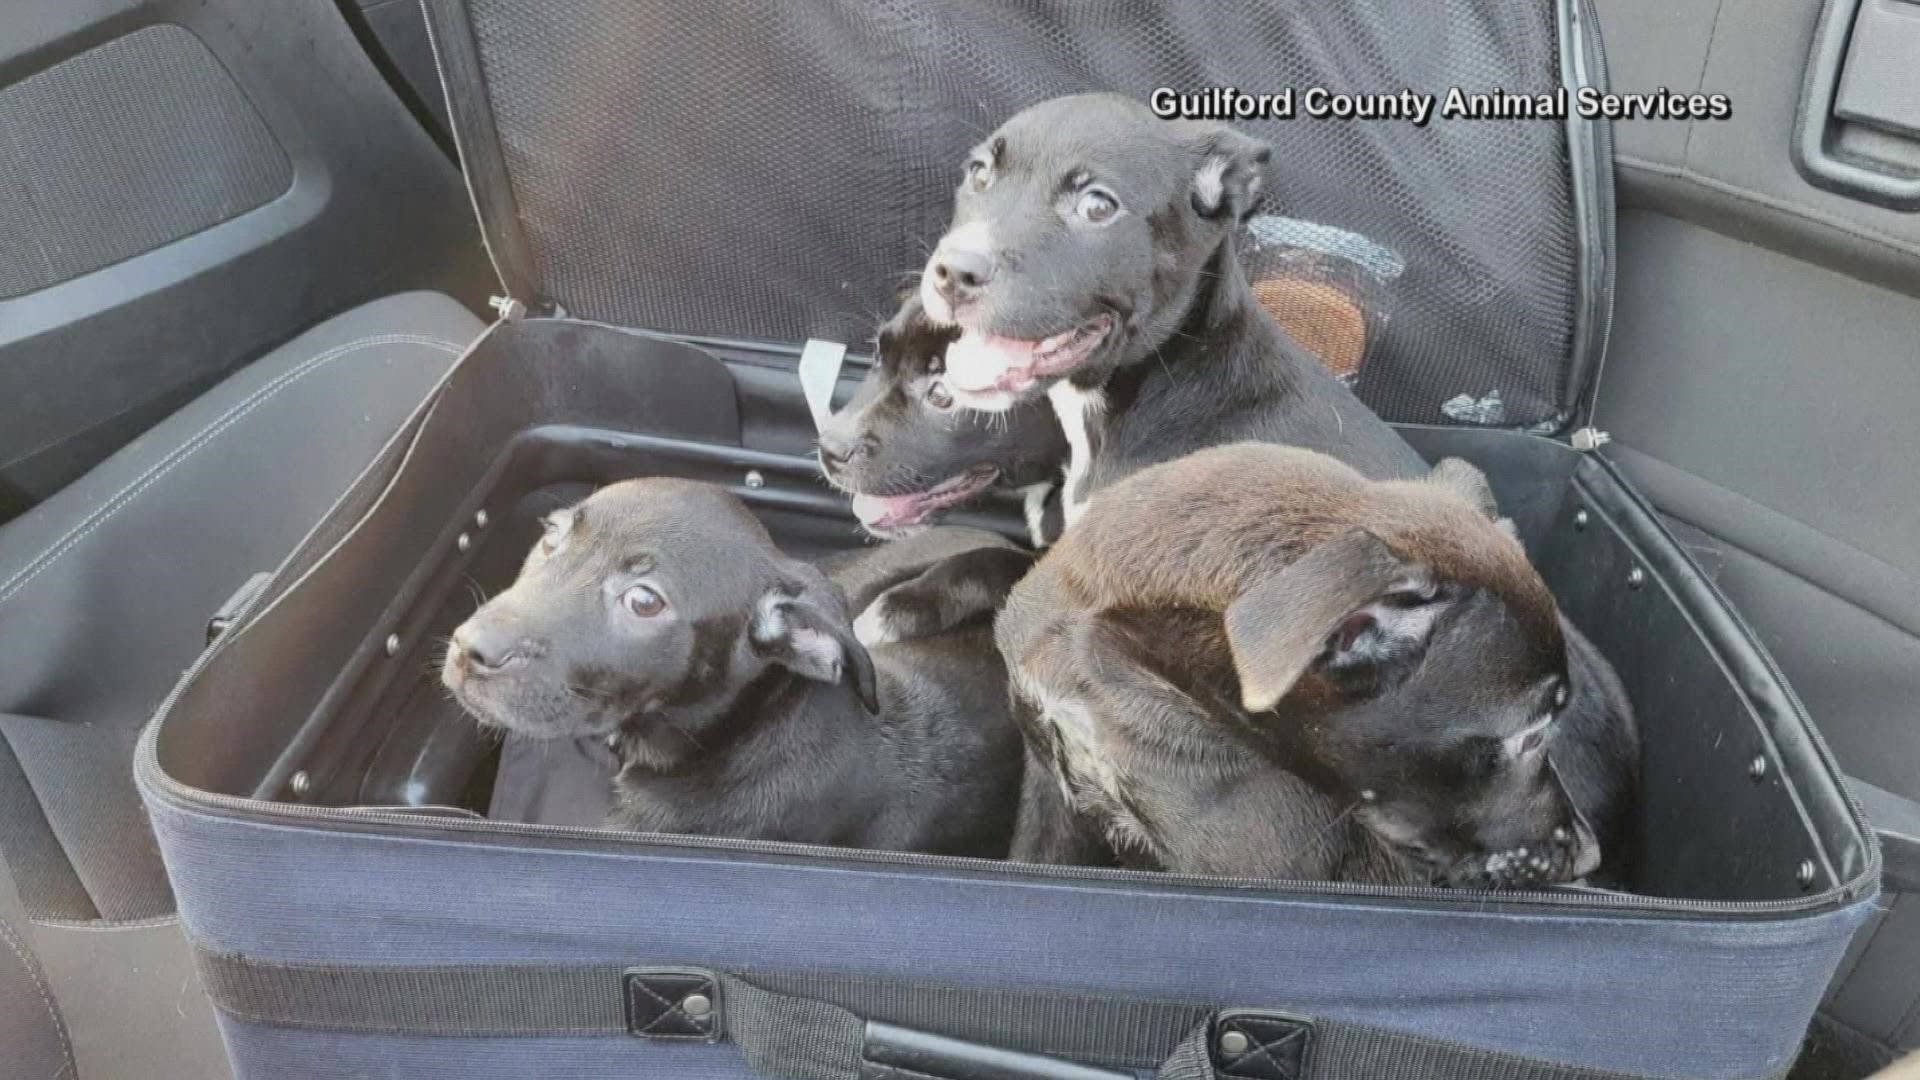 Drivers spotted the pups off the side of the road and helped.